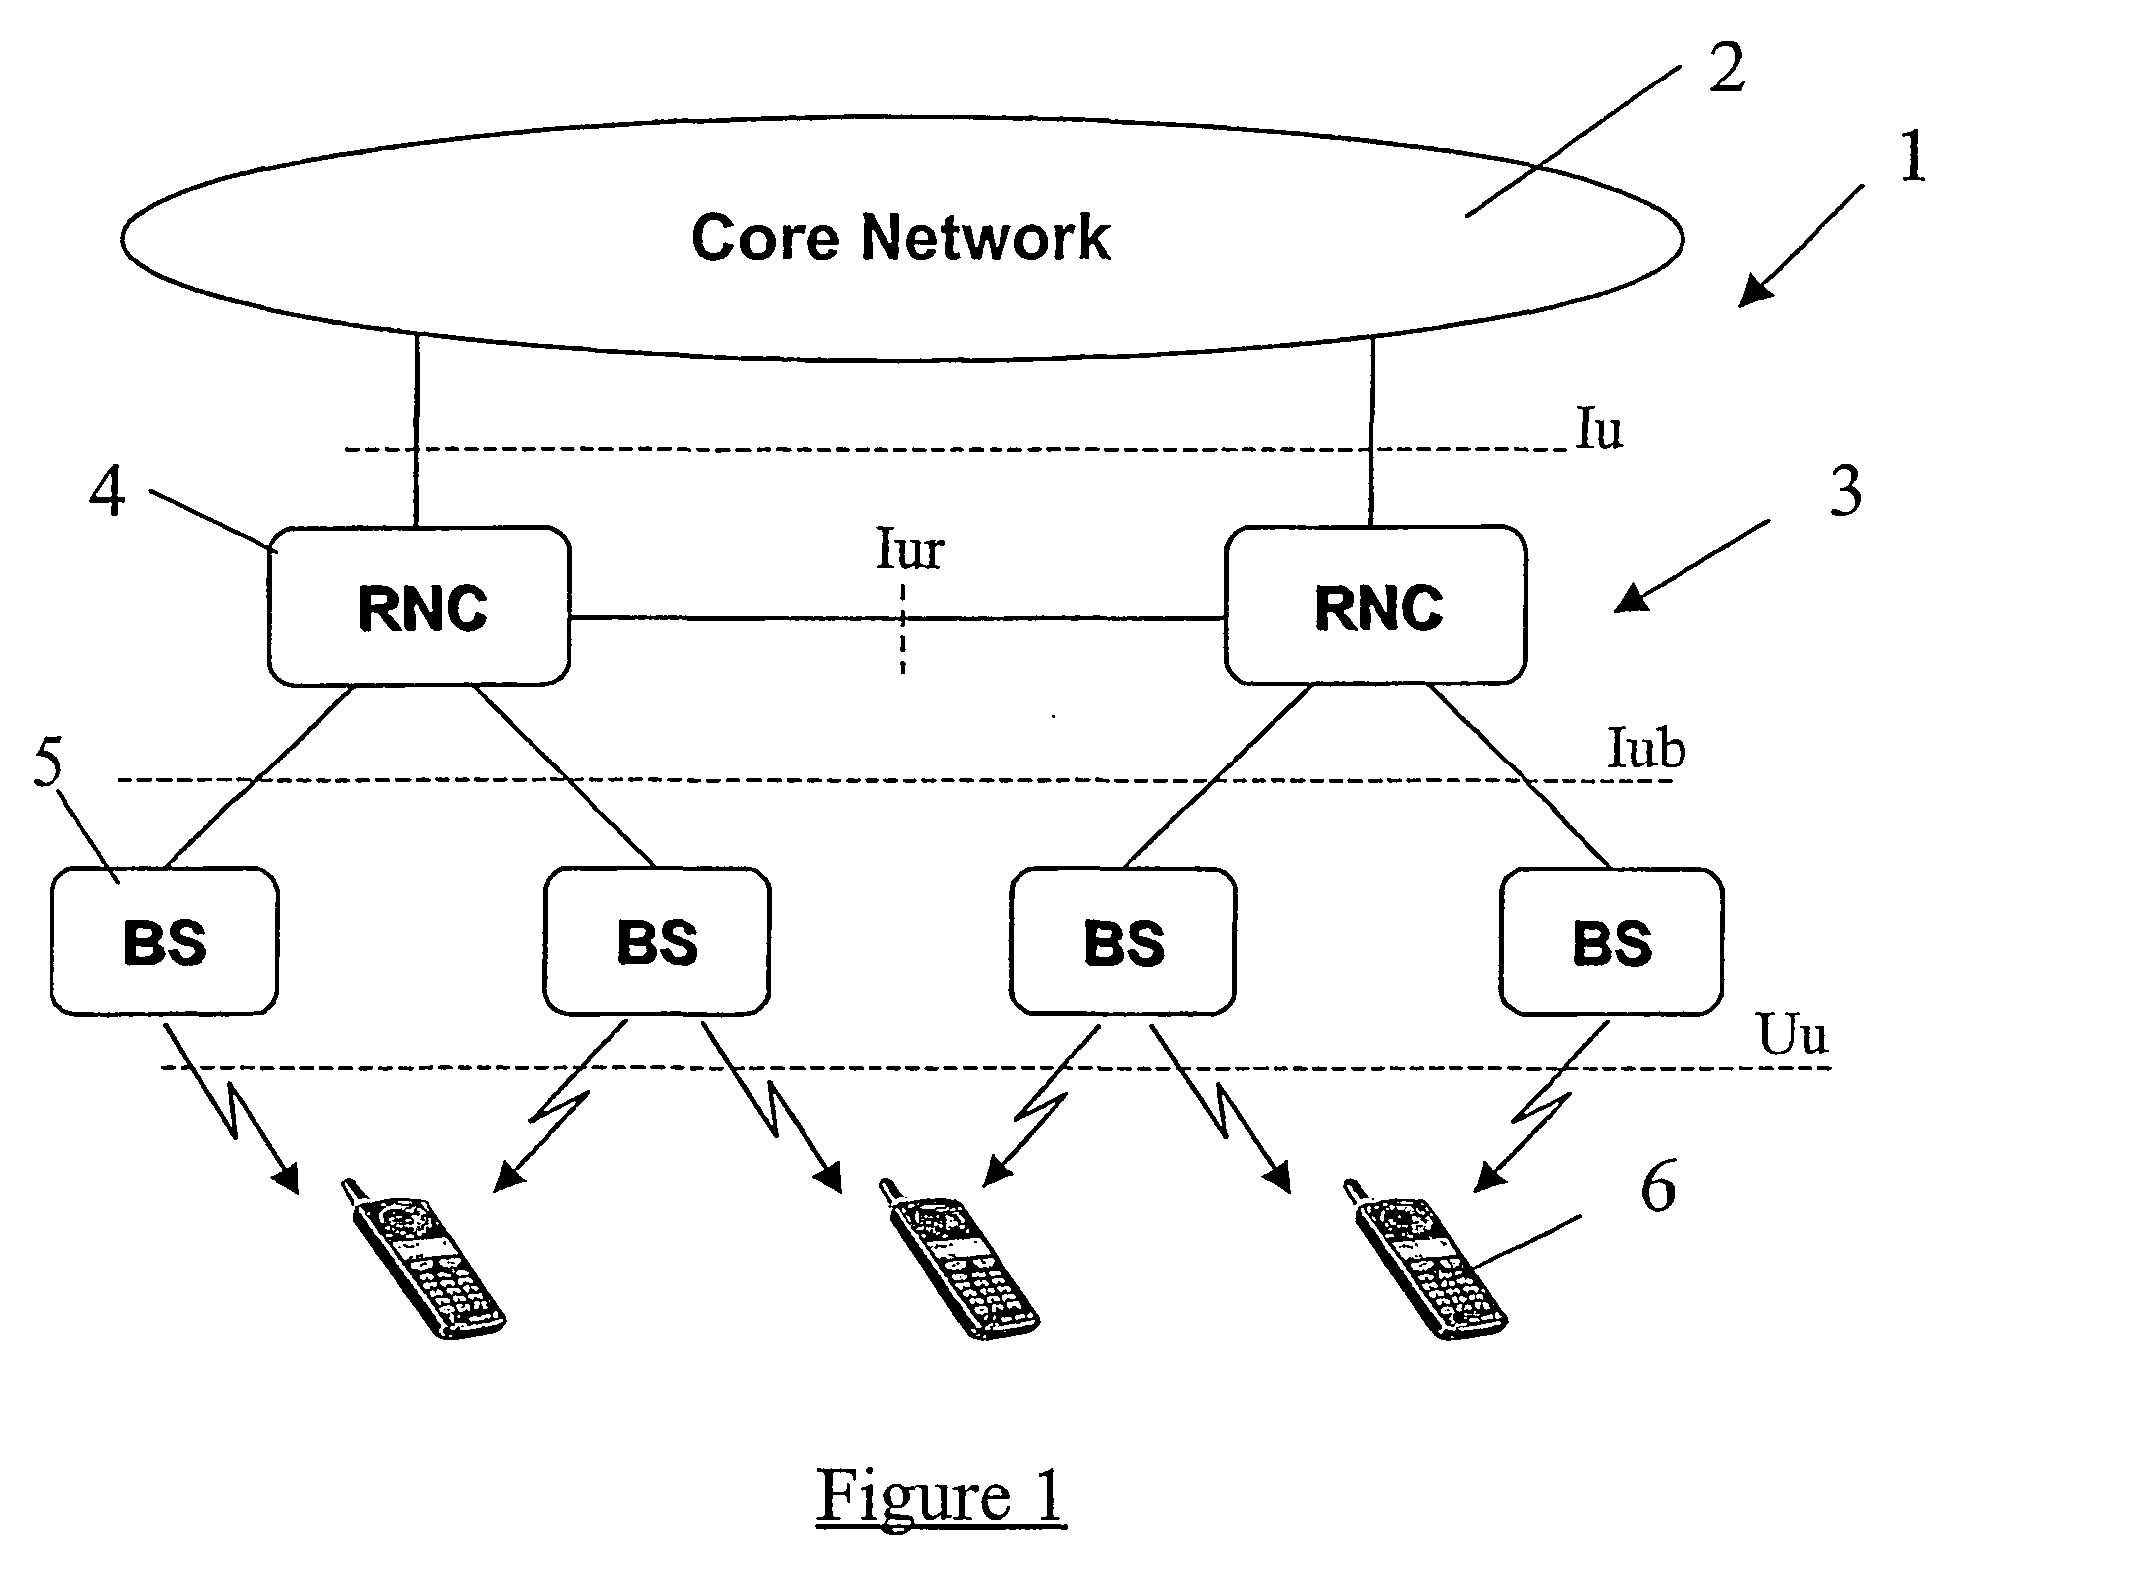 Transmission control method in a radio access network implementing an automatic repetition request (aqr) protocol at the base station (aqr)